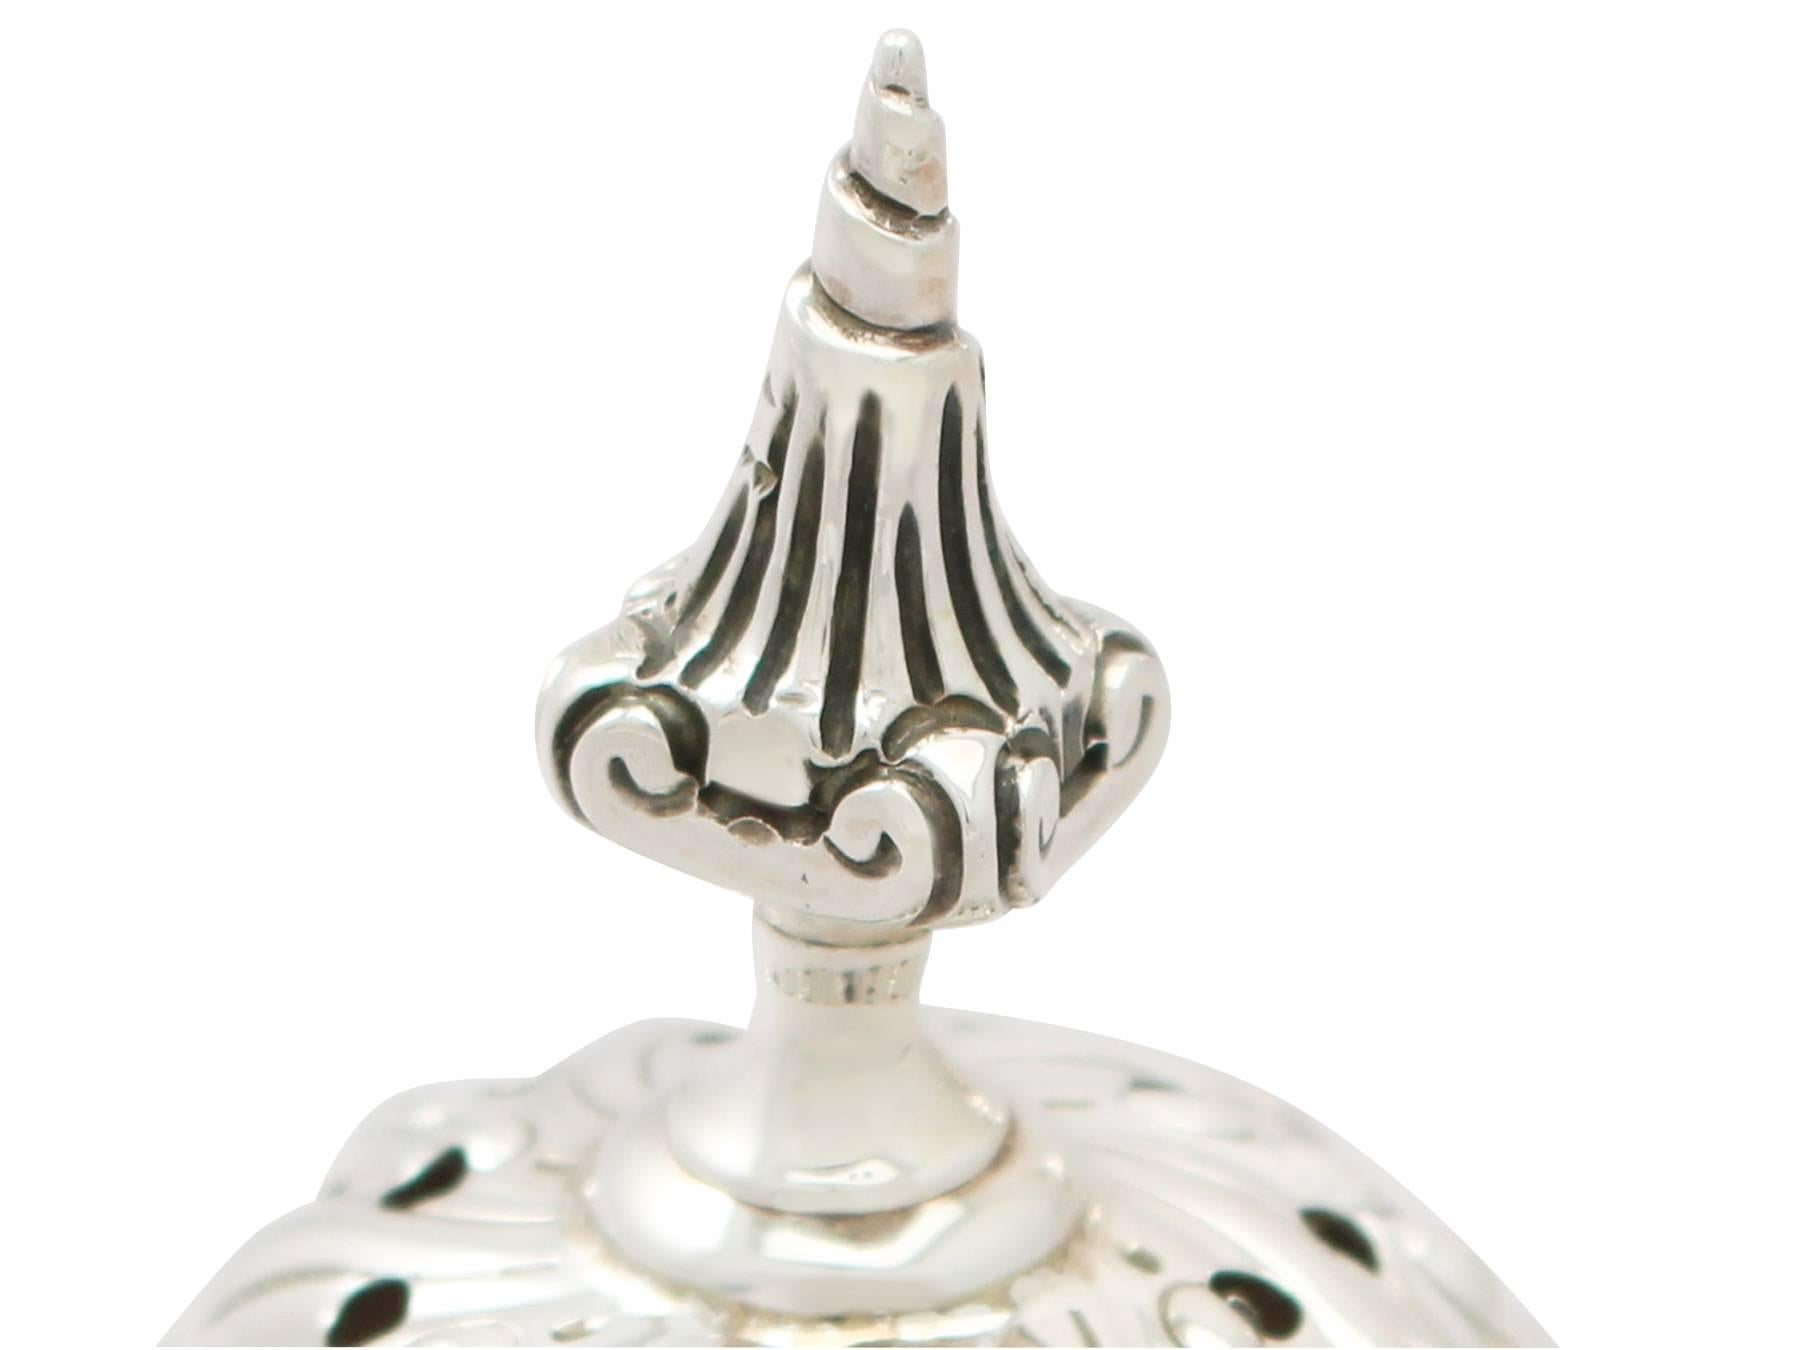 Antique Edwardian Sterling Silver Sugar Caster In Excellent Condition For Sale In Jesmond, Newcastle Upon Tyne